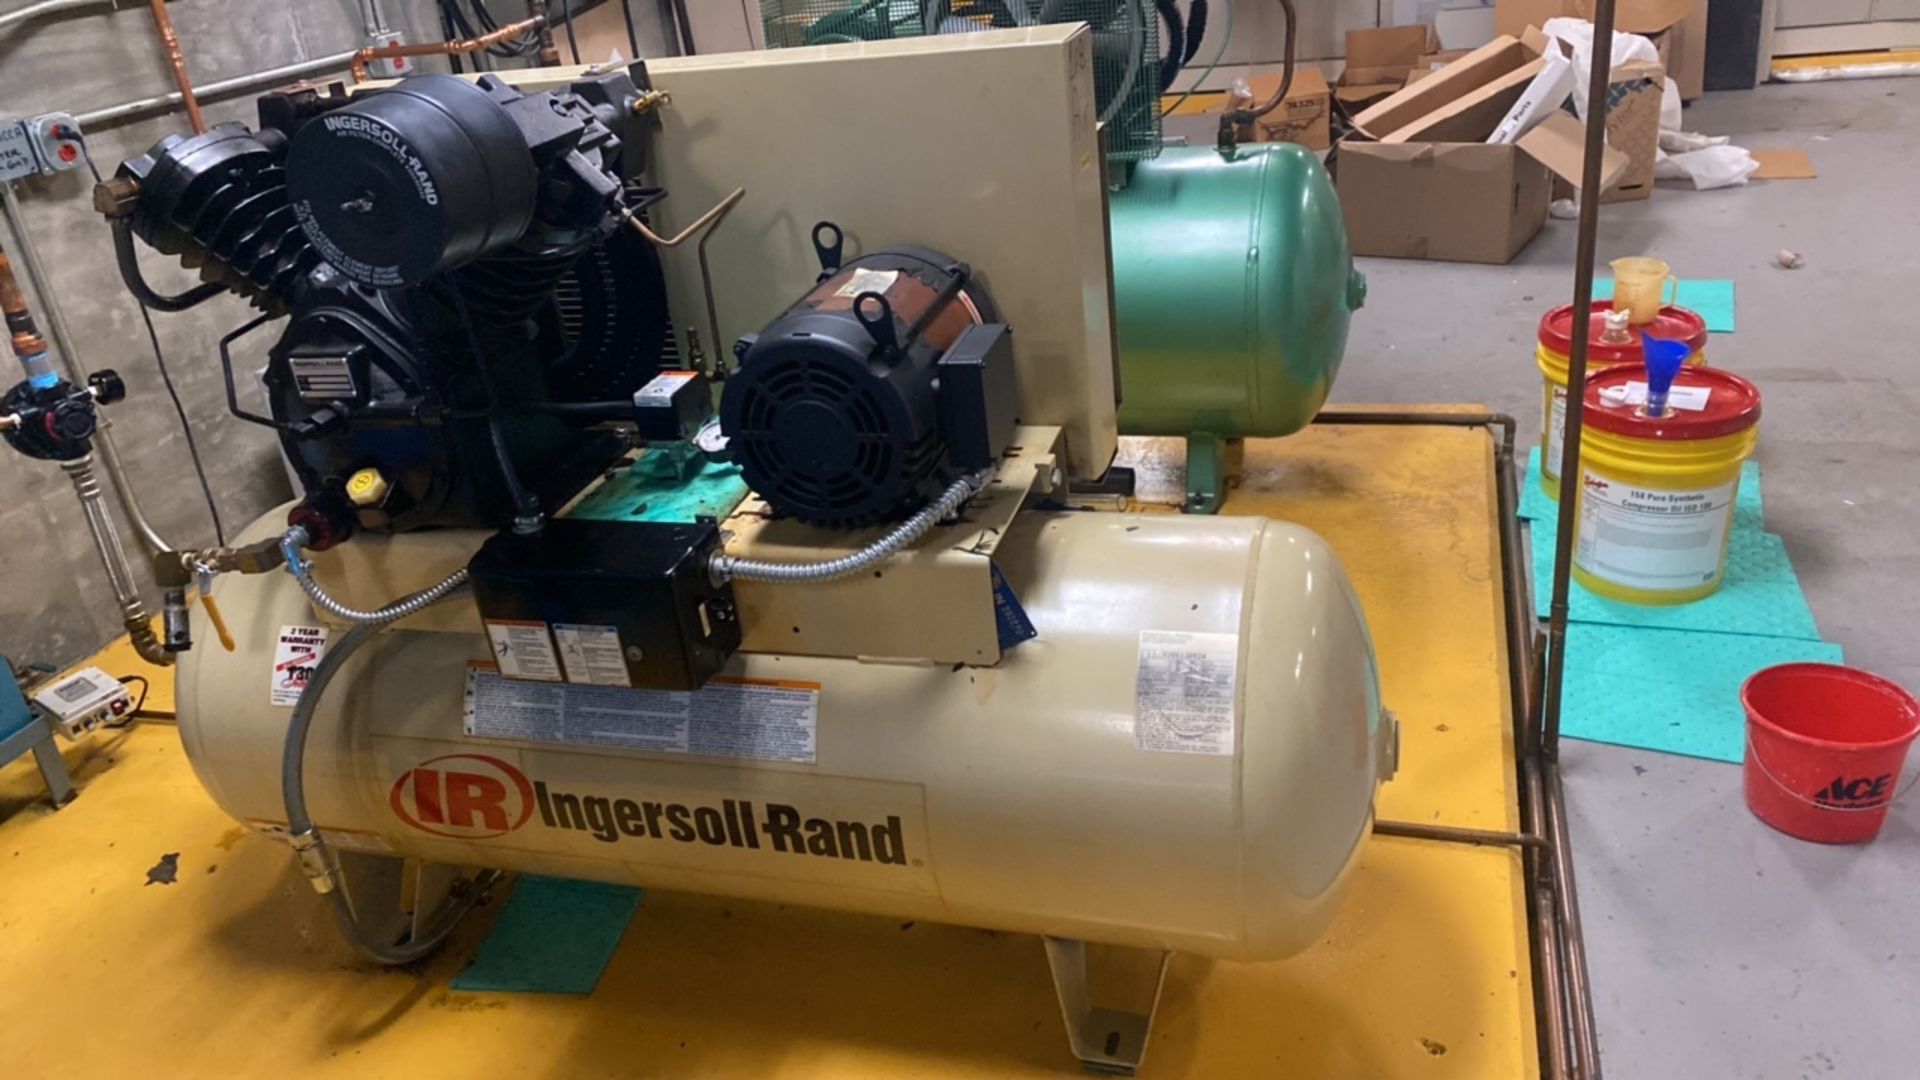 INGERSOLL-RAND 254507.5 175 PSIG COMPRESSOR WITH 60 GALLON TANK (THIS LOT IS SUBJECT FOR DELAYED REM